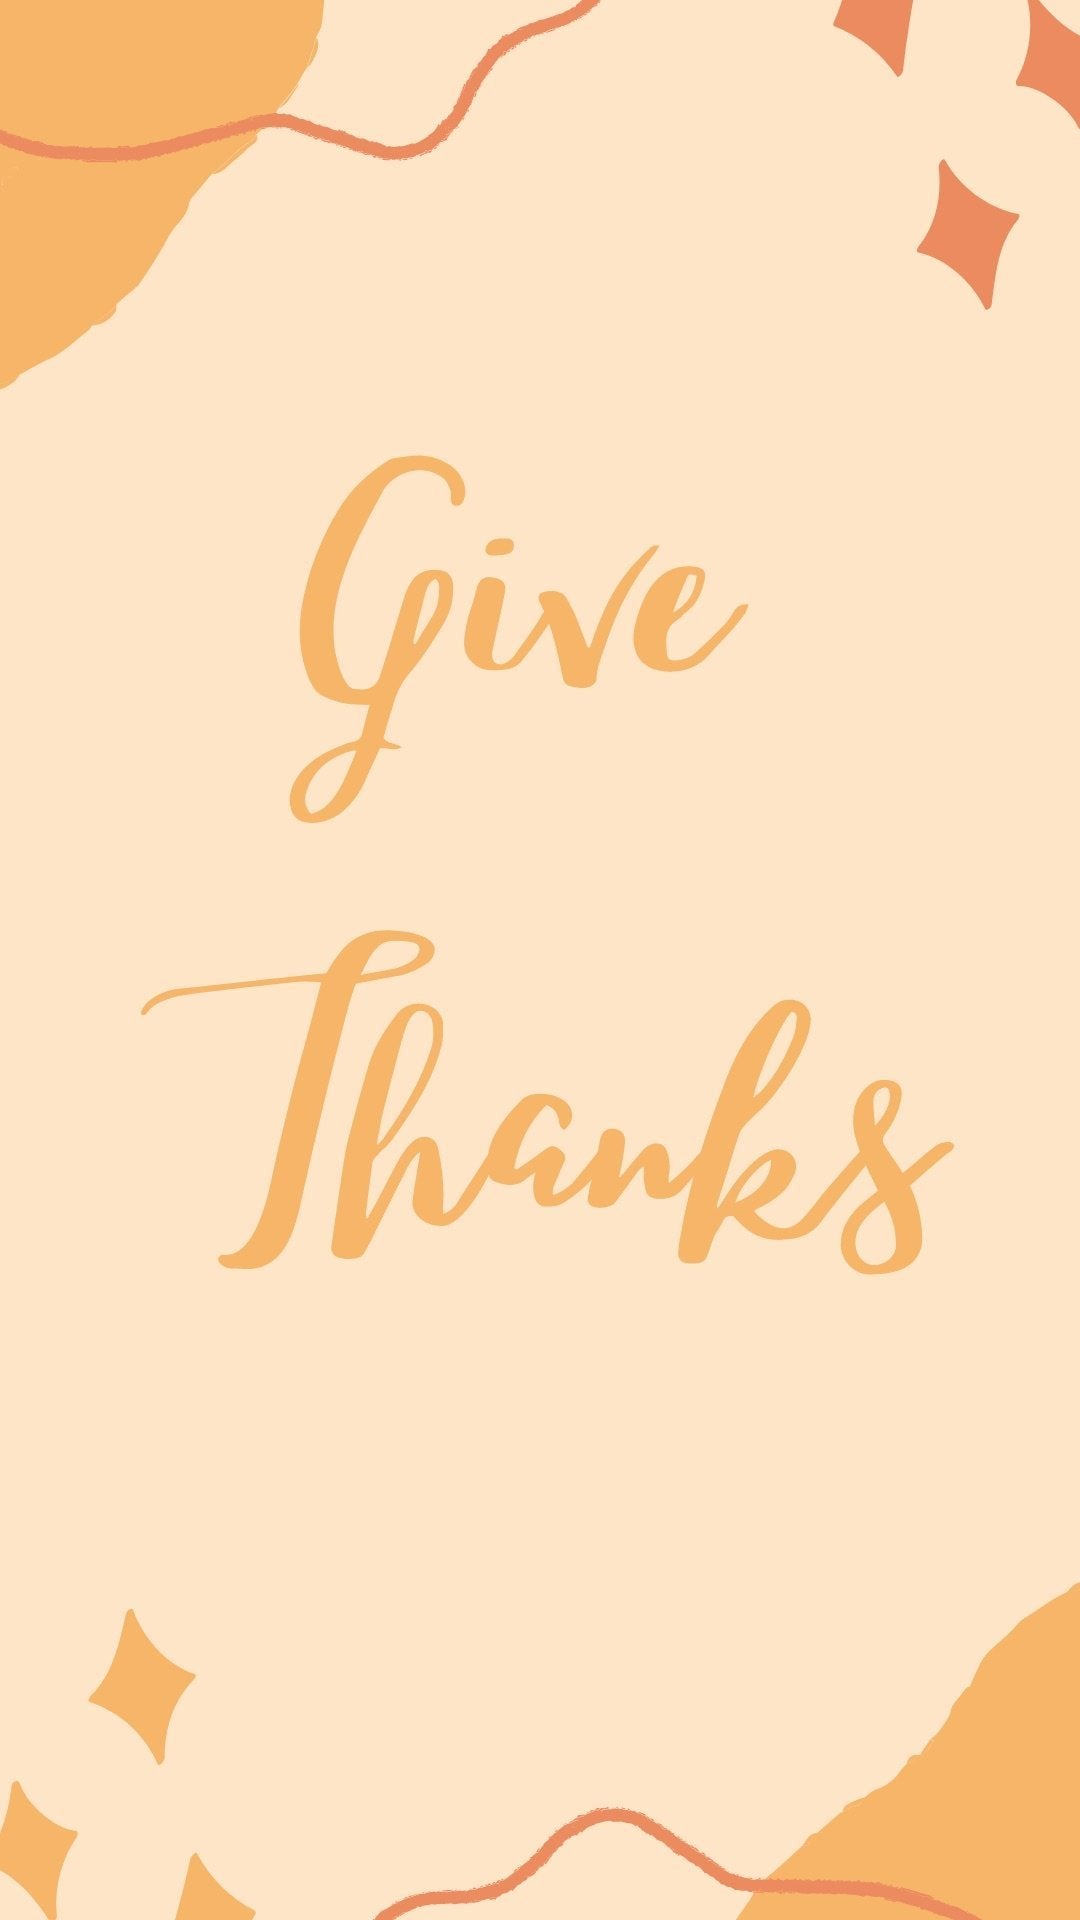 Give Thanks Phone Wallpapers - Bee The Light